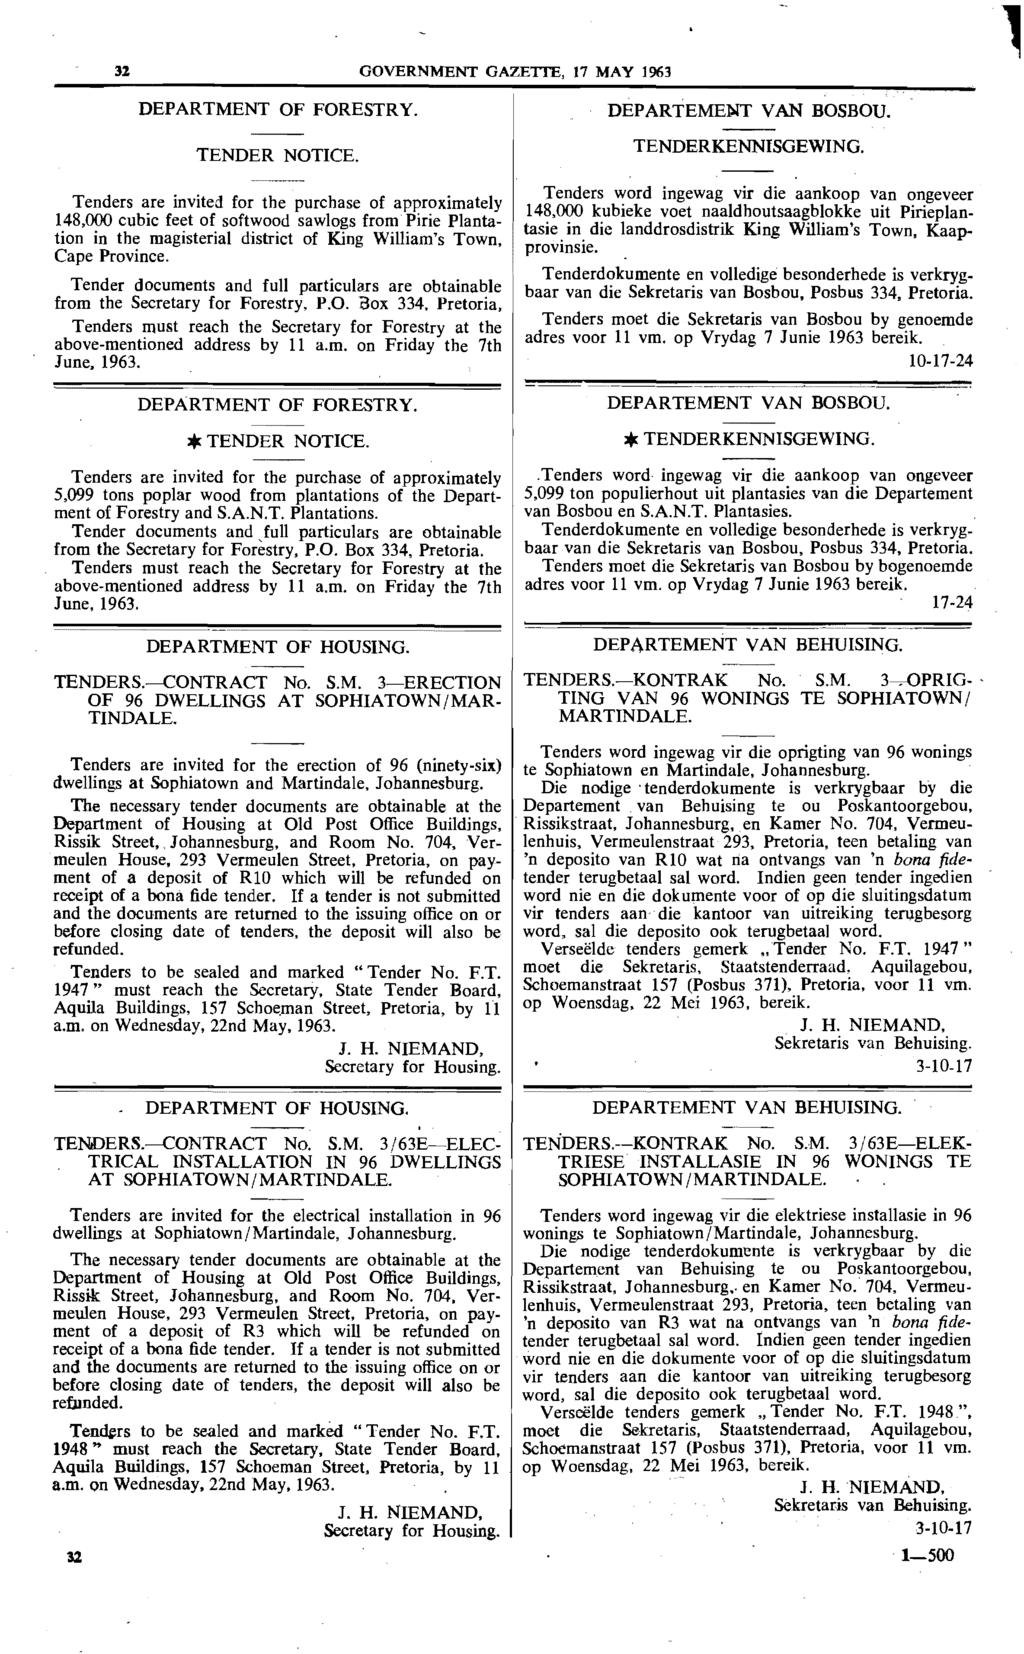 31 GOVERNMENT GAZETrE, 17 MAY 1963 DEPARTMENT OF FORESTRY. TENDER NOTICE.